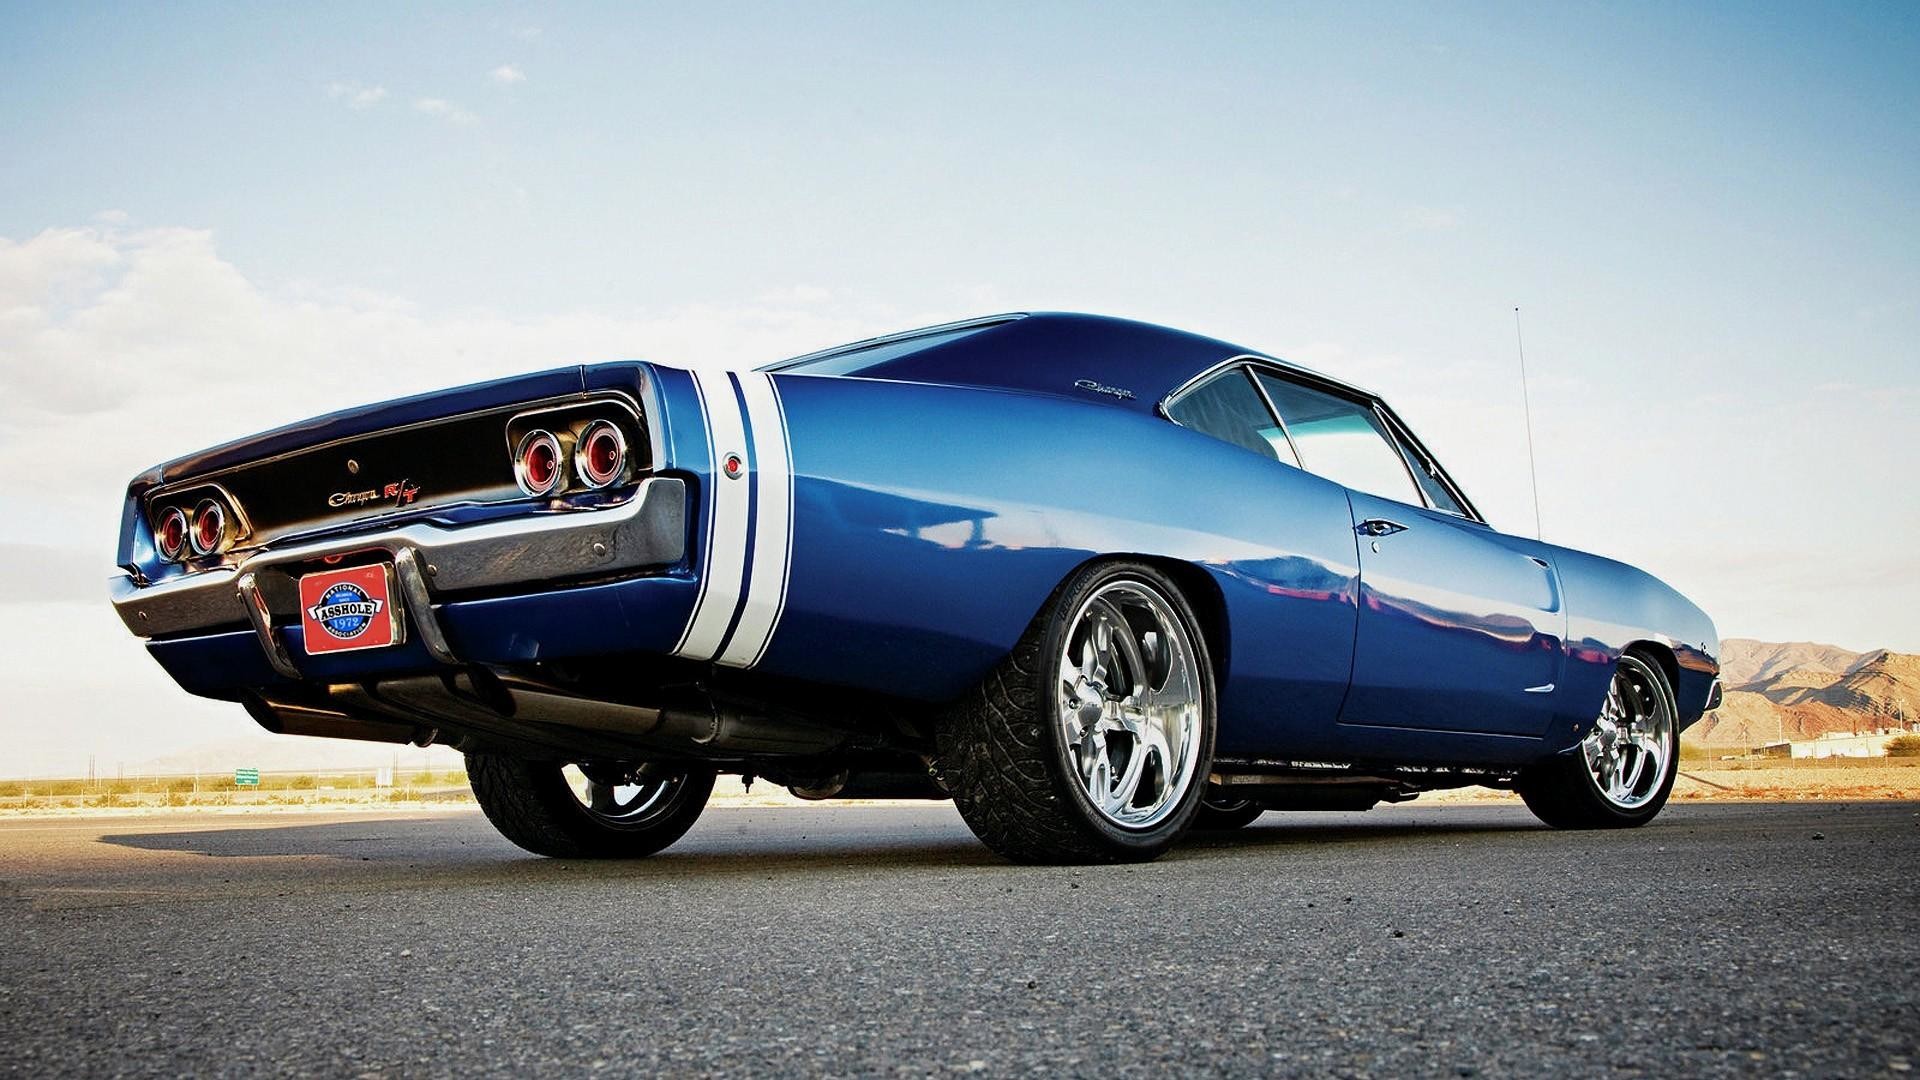 1920x1080 wallpaper.wiki-Blue-1970-Dodge-Charger-Background-Free-